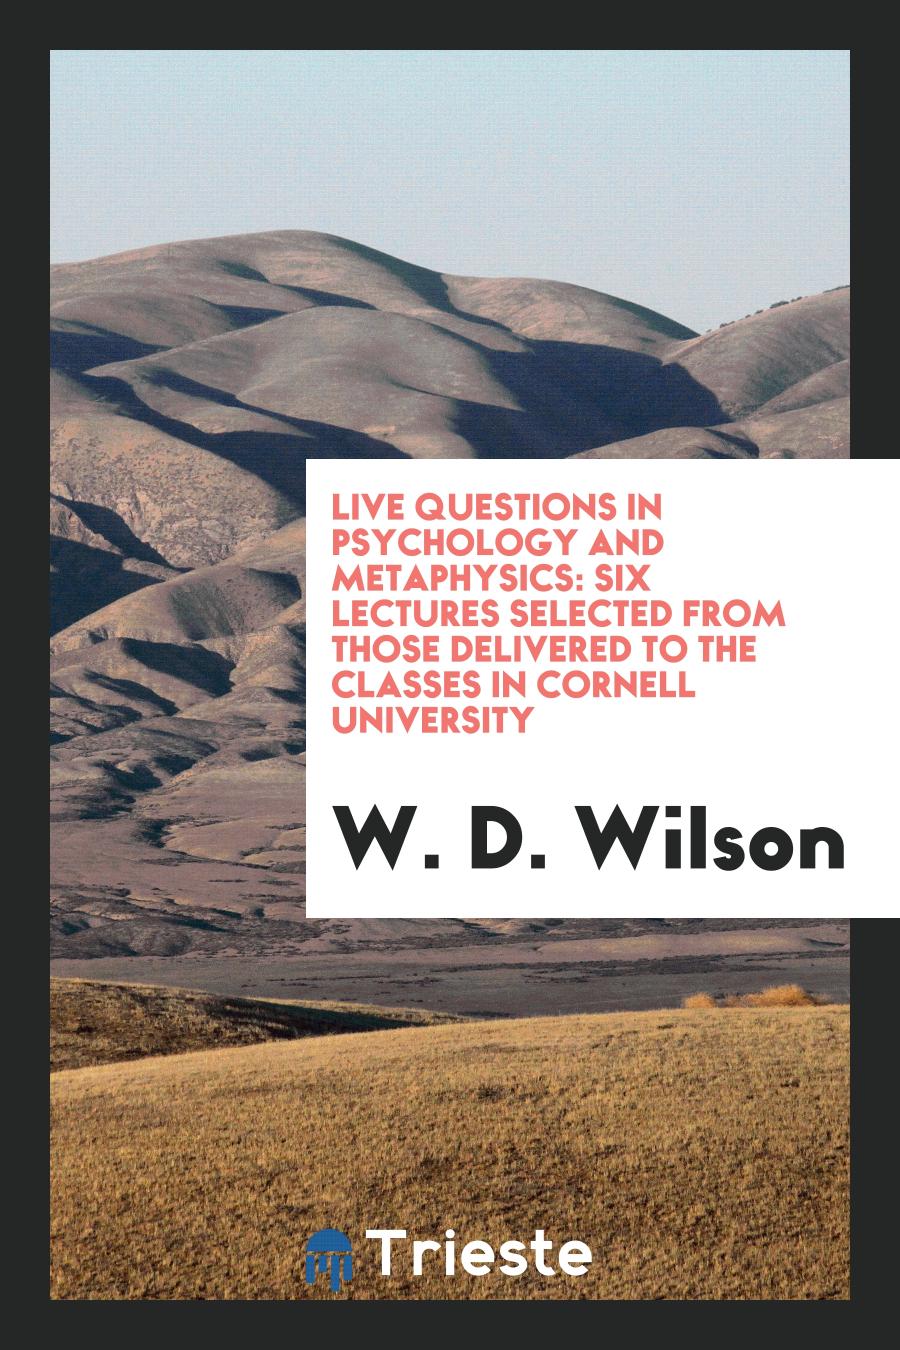 Live Questions in Psychology and Metaphysics: Six Lectures Selected from Those Delivered to the Classes in Cornell University